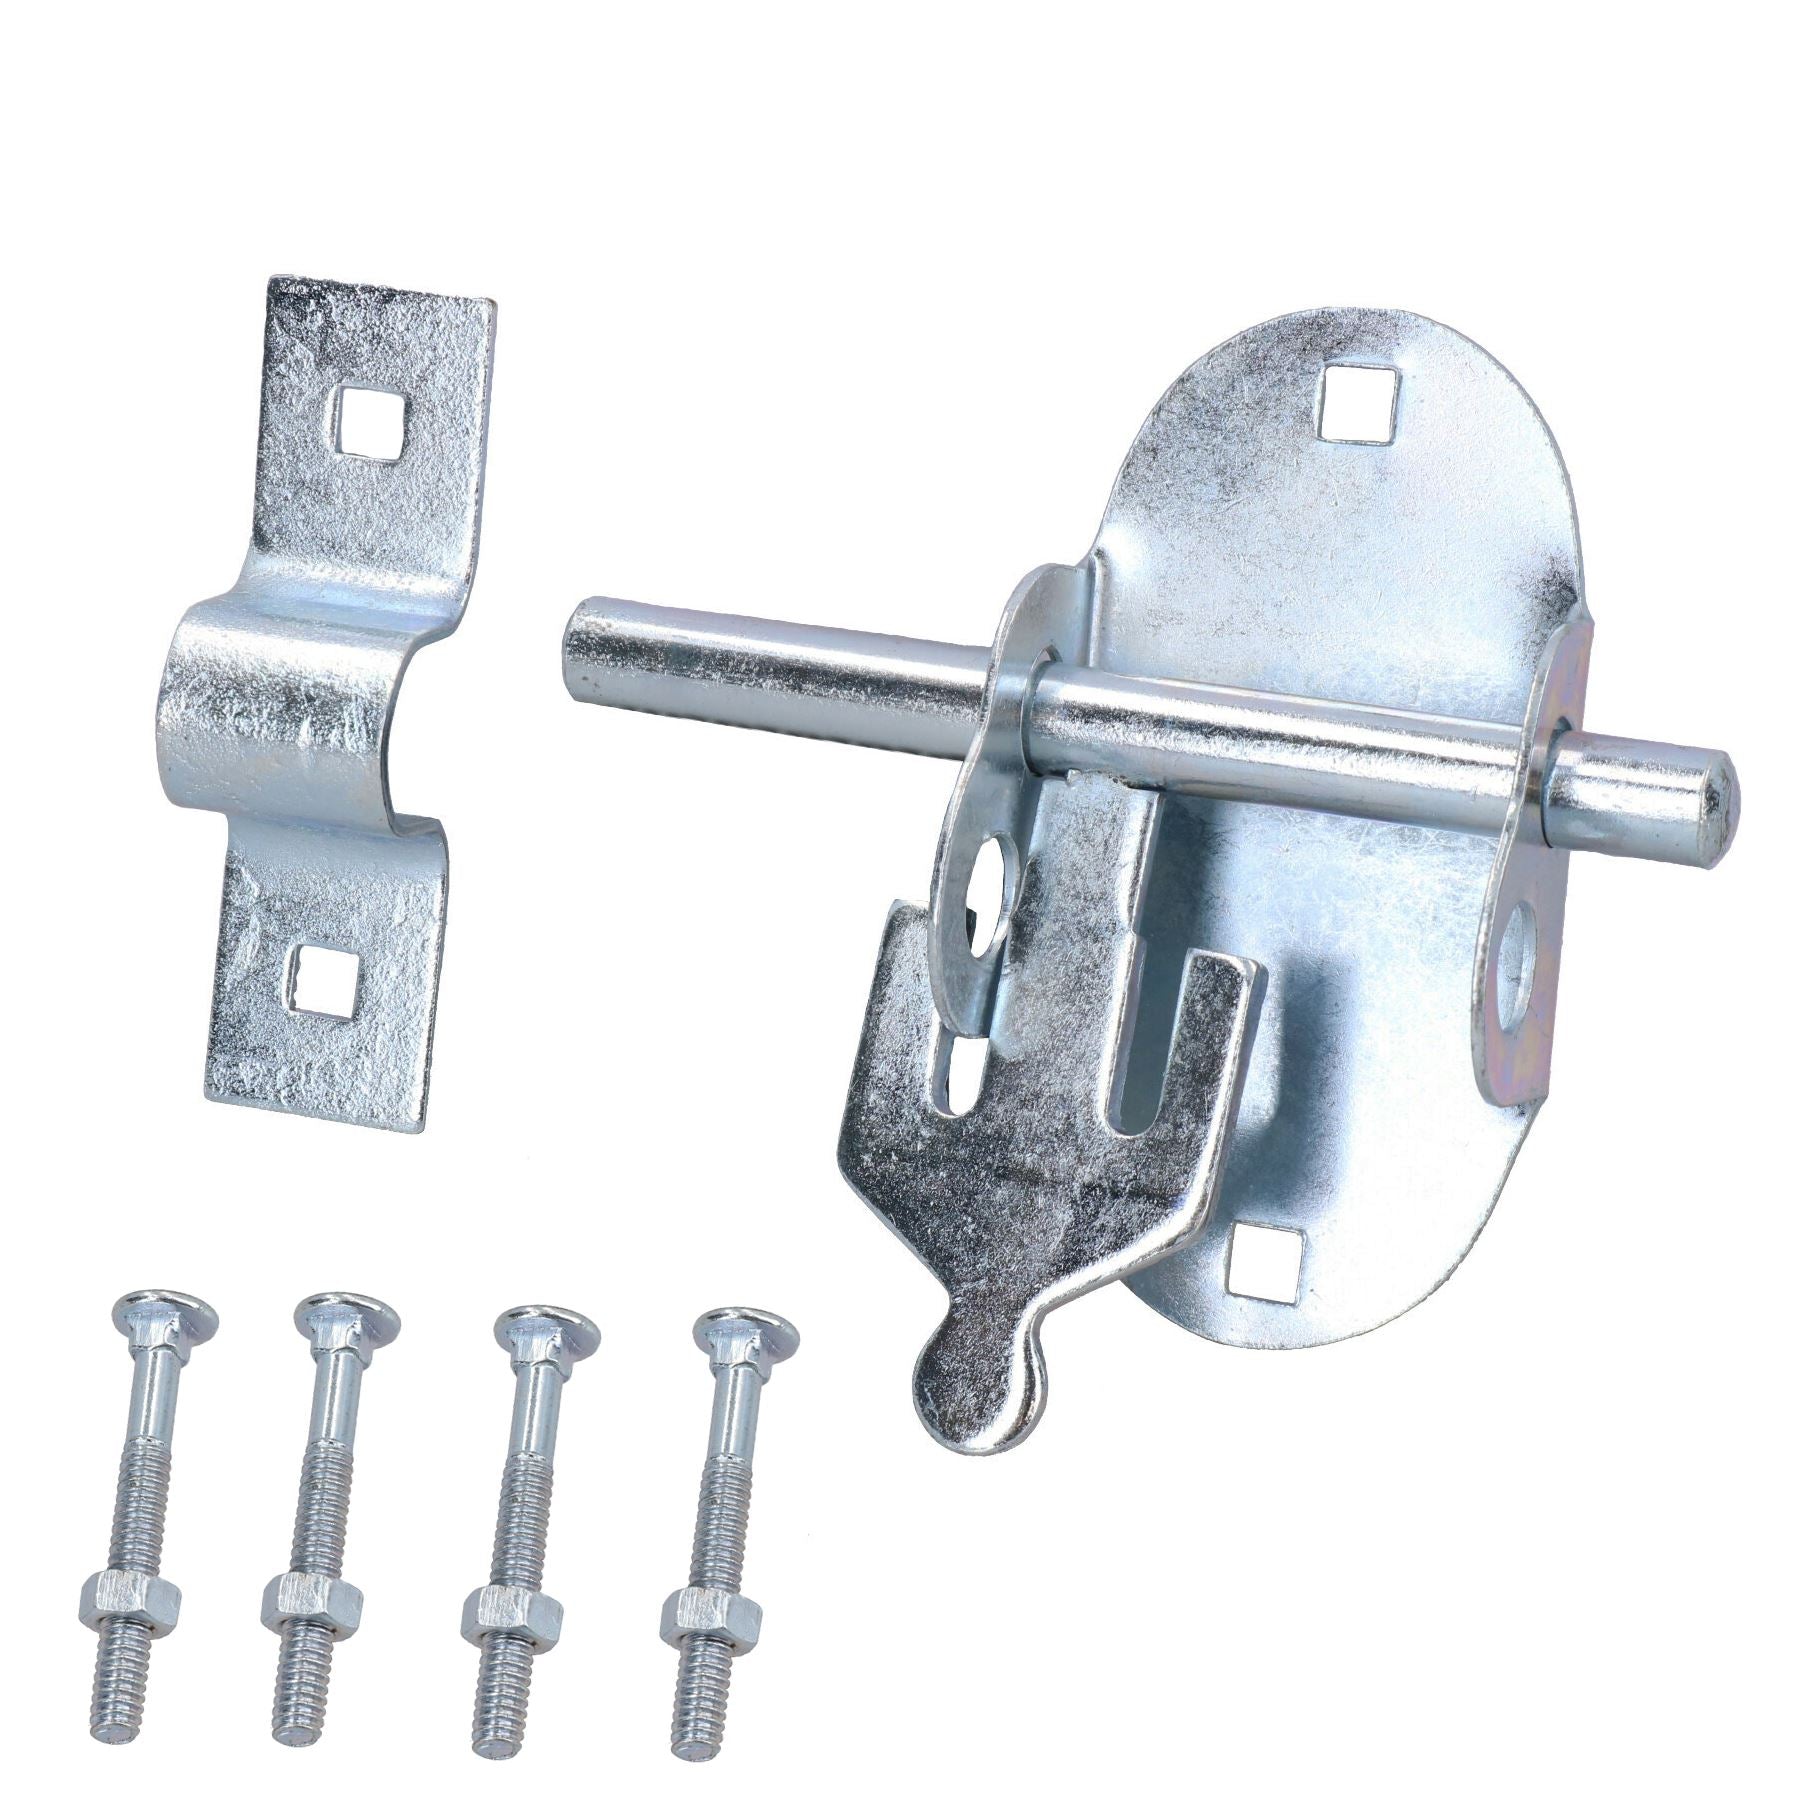 4.5” (115mm) Oval Pad Bolt Sliding Lock Gate Shed Door Padbolt with Fixings